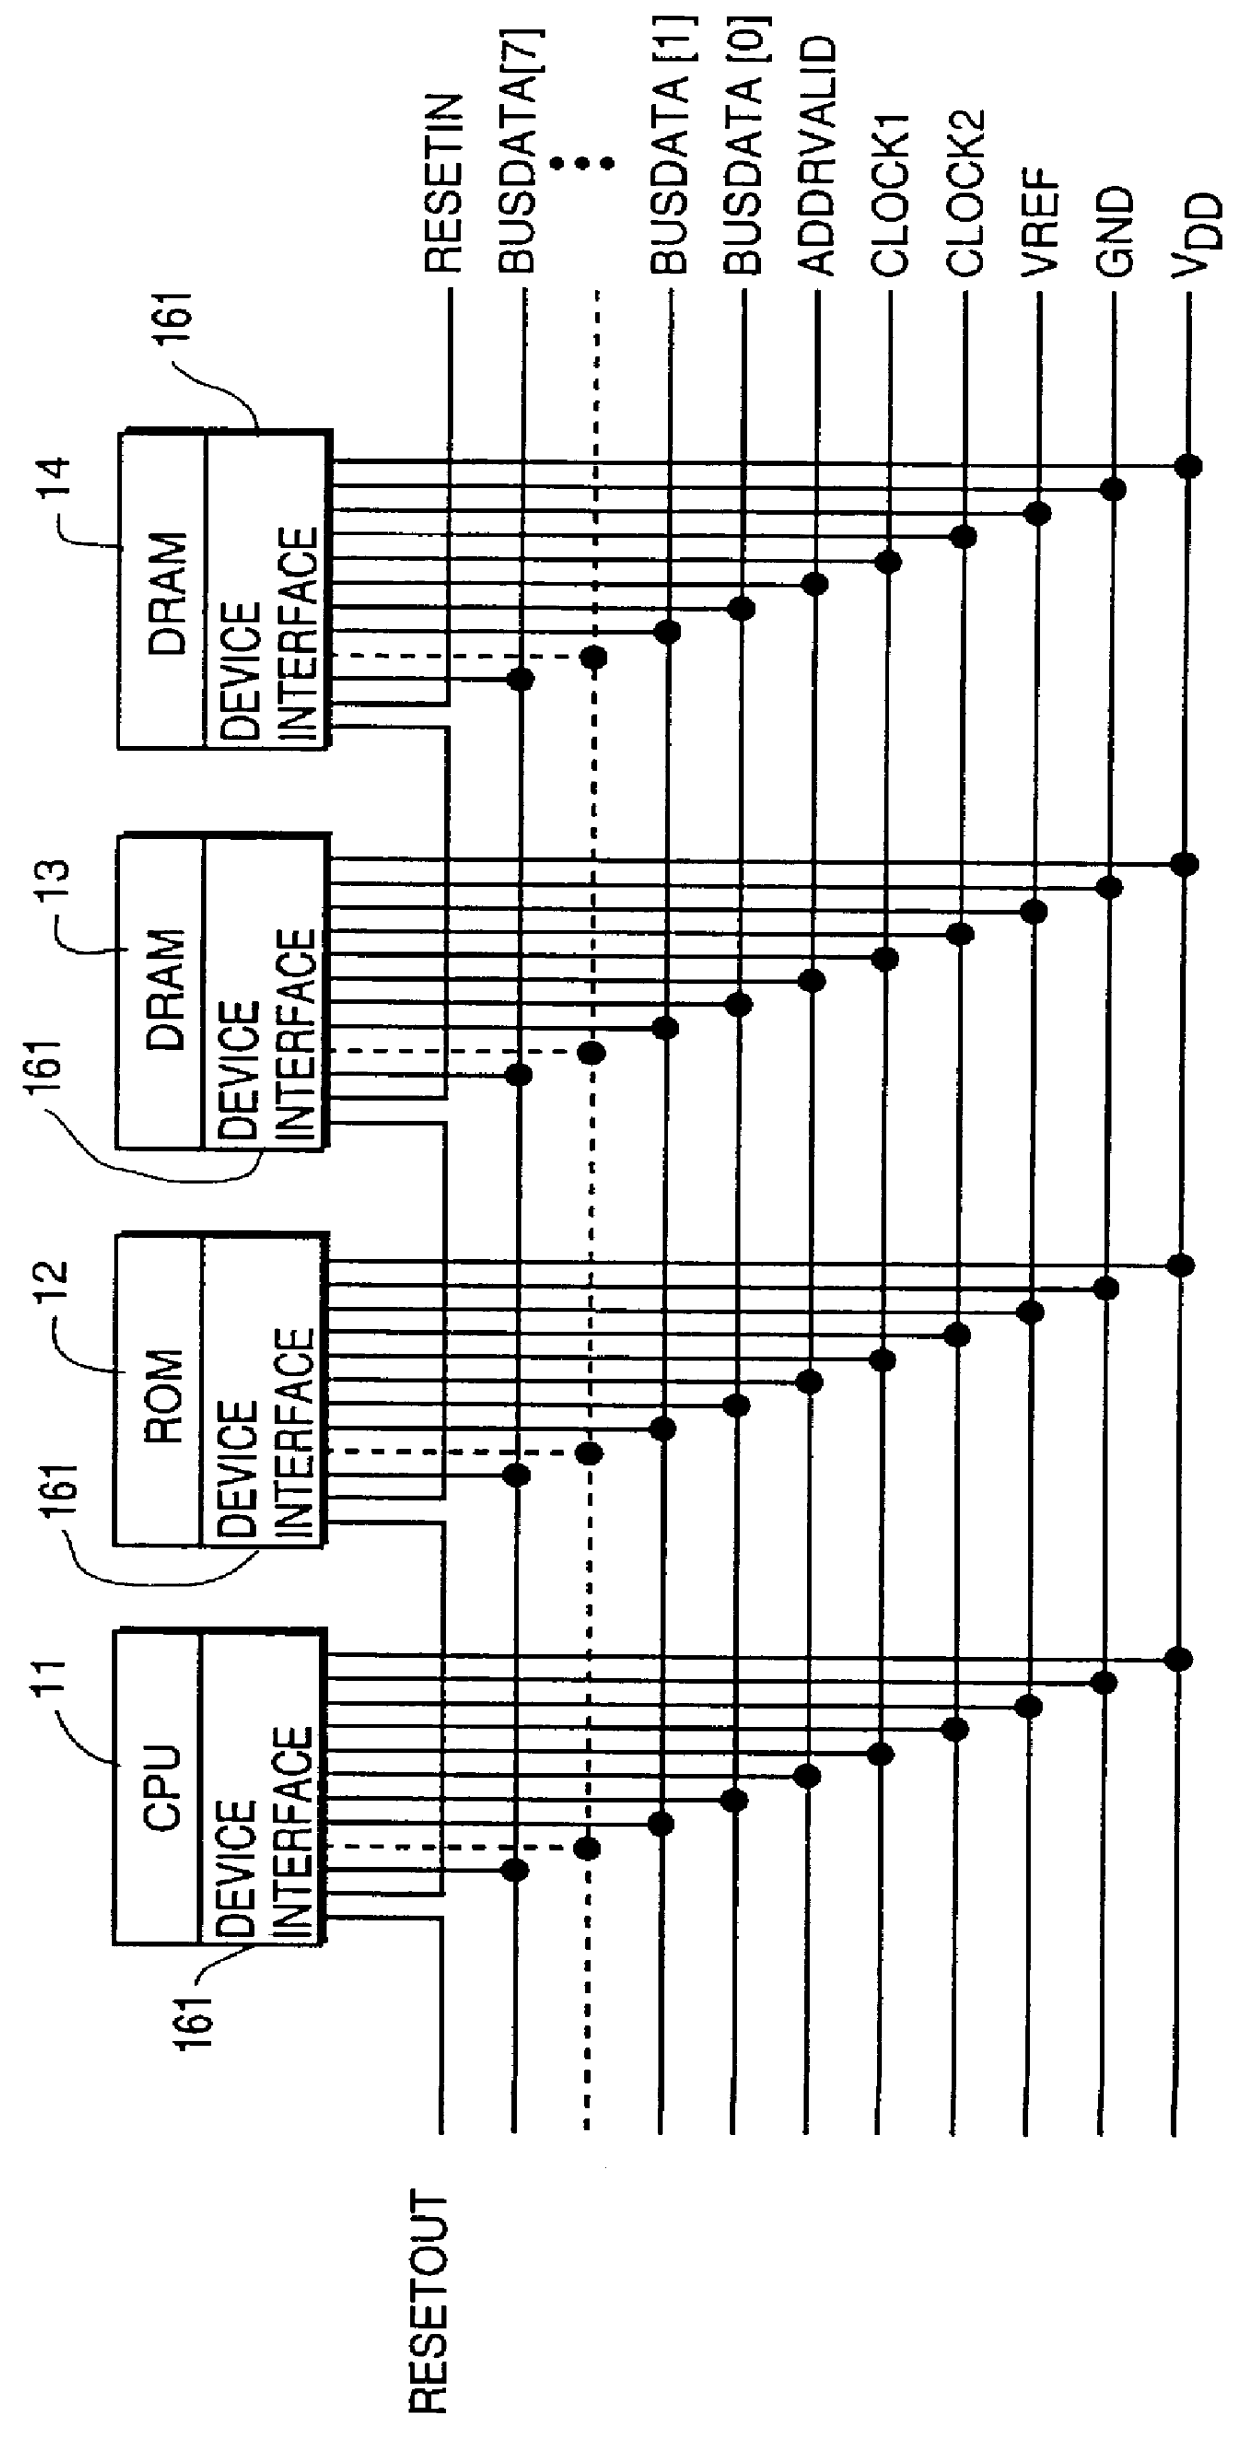 Dual clocked synchronous memory device having a delay time register and method of operating same